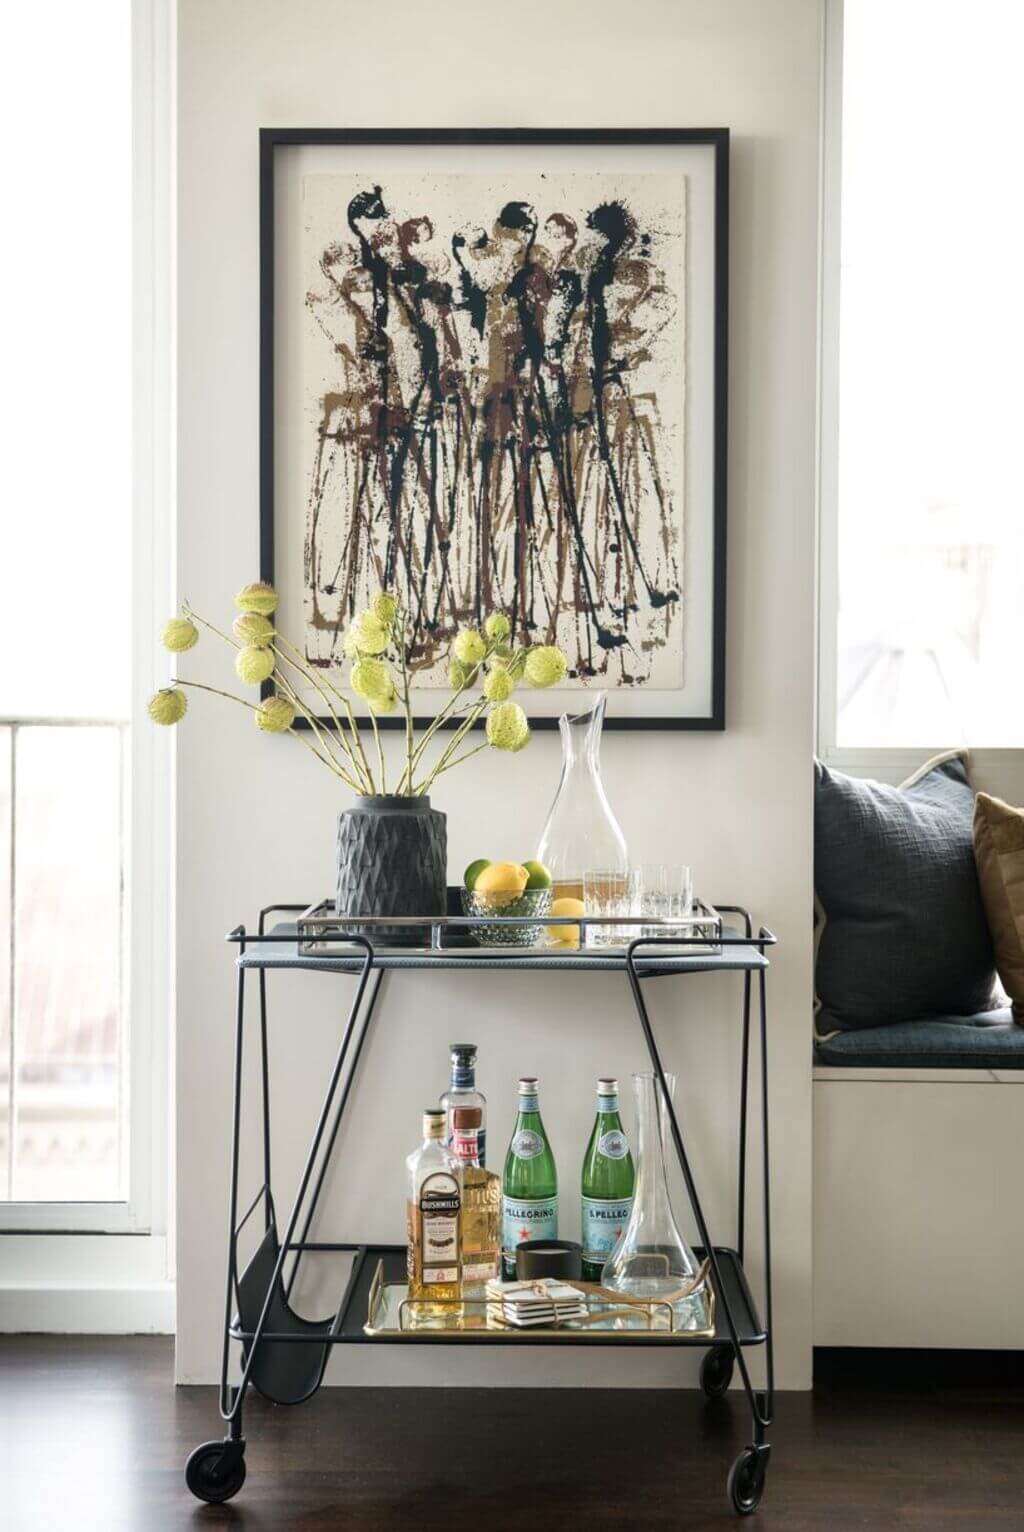 A bar cart with bottles and glasses on it
